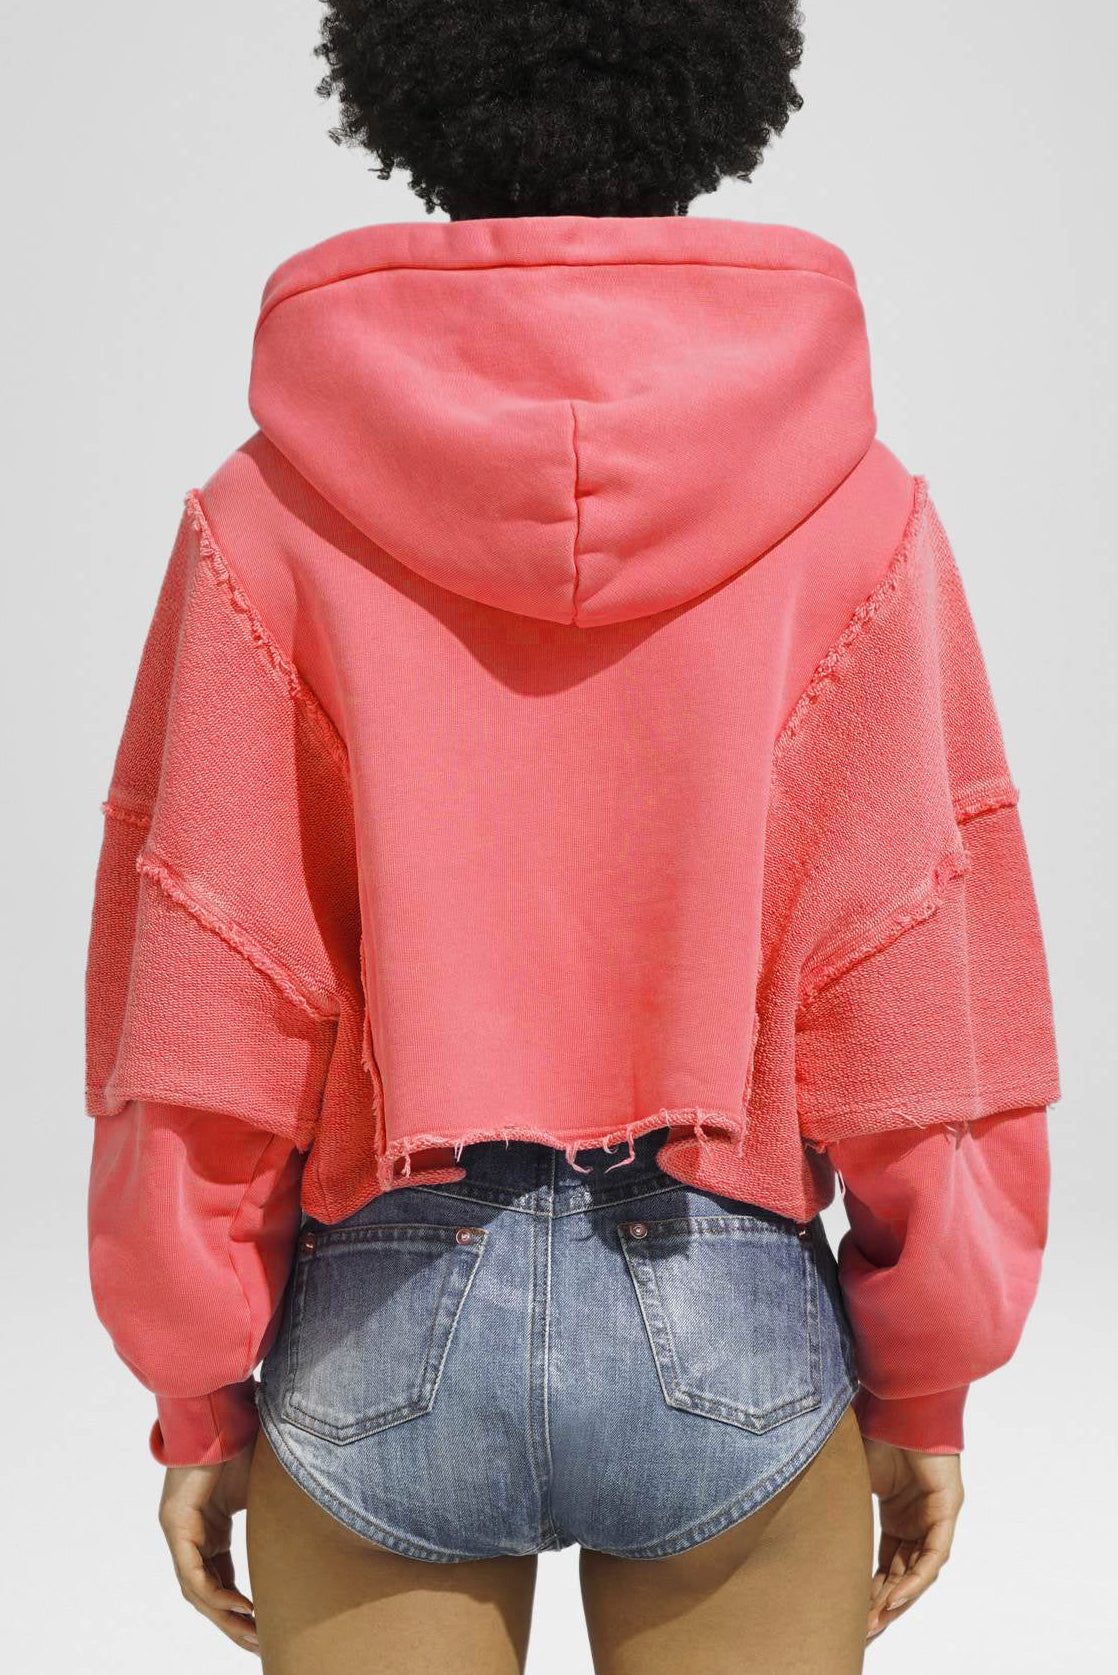 Hoodie Crop Double Pockets in Candy PinkKhrisjoy - Anita Hass